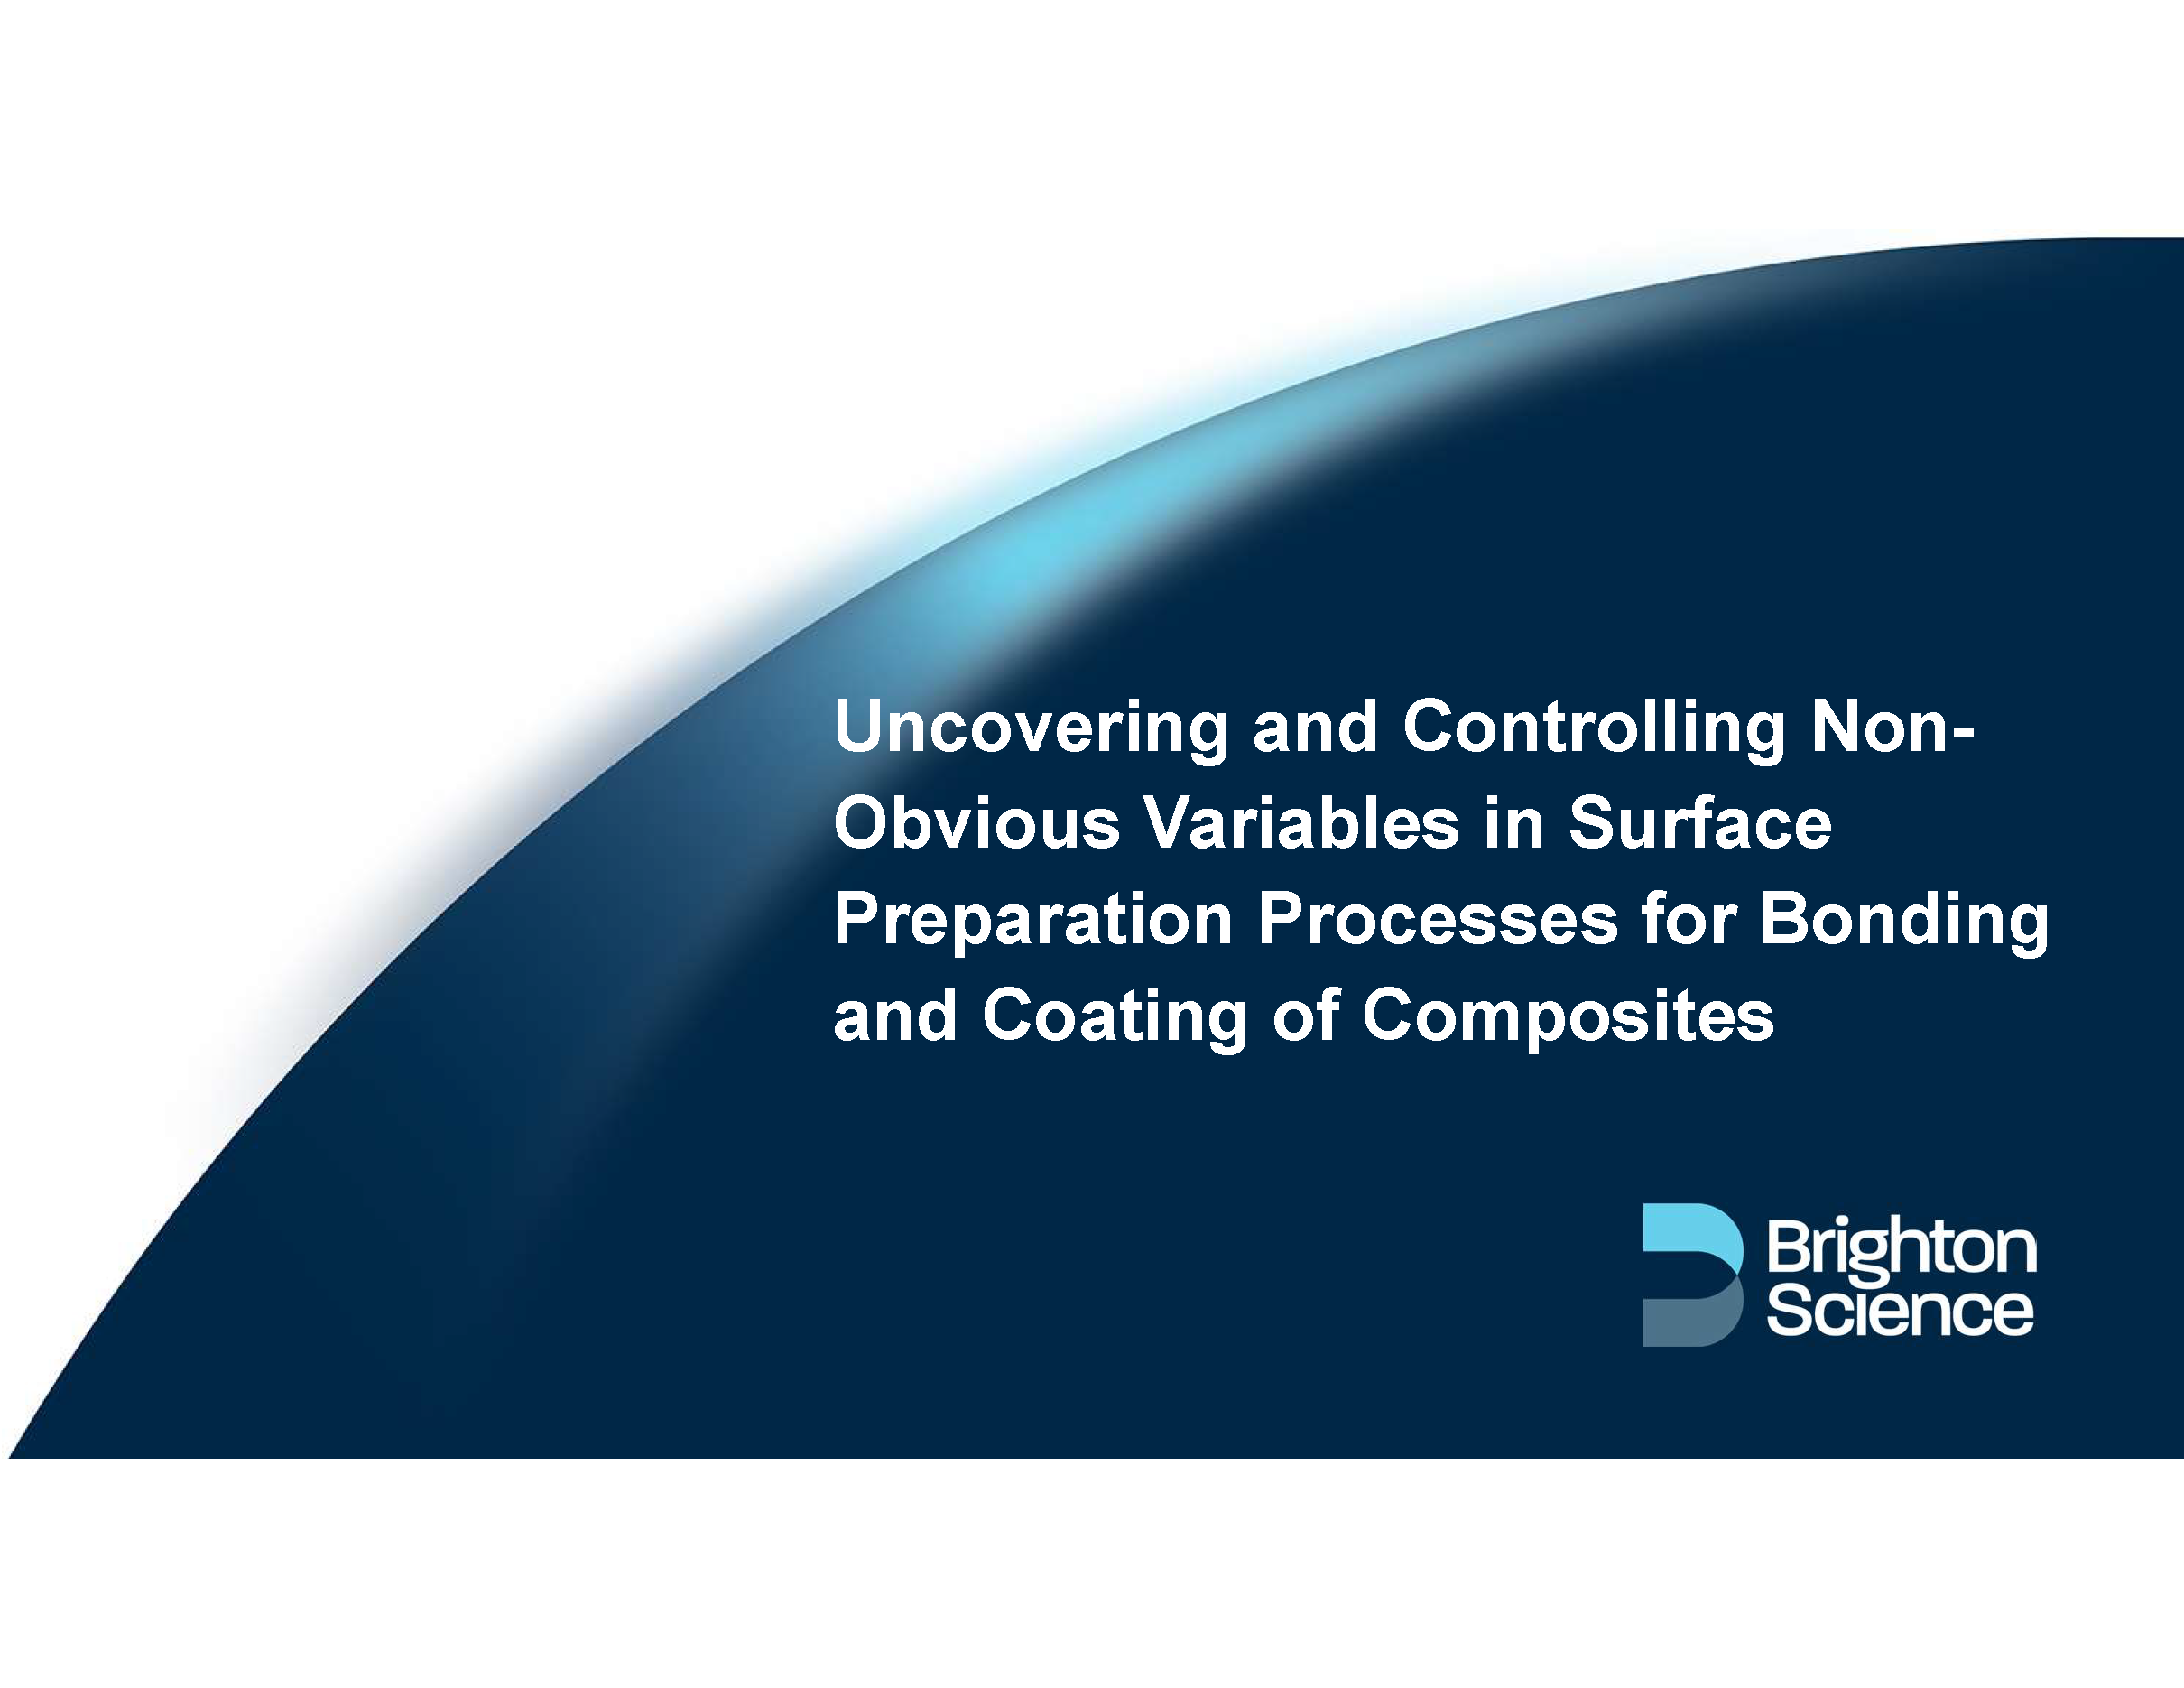 Webinar: Uncovering and Controlling Non-obvious Variables in Surface Preparation of Polymers to Maximize Adhesion